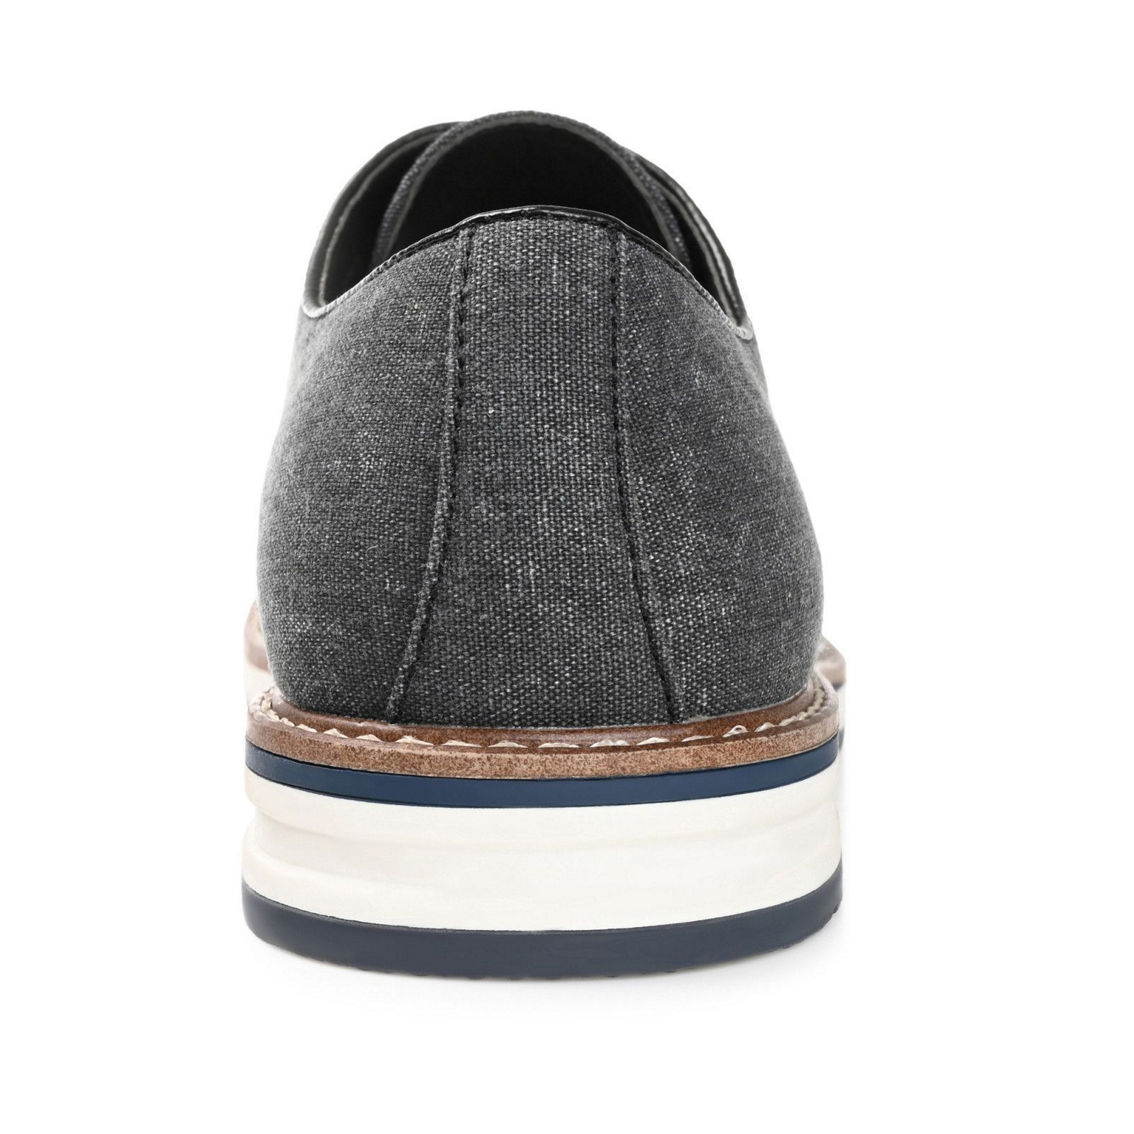 Vance Co. Ammon Textile Casual Dress Shoe - Image 3 of 4